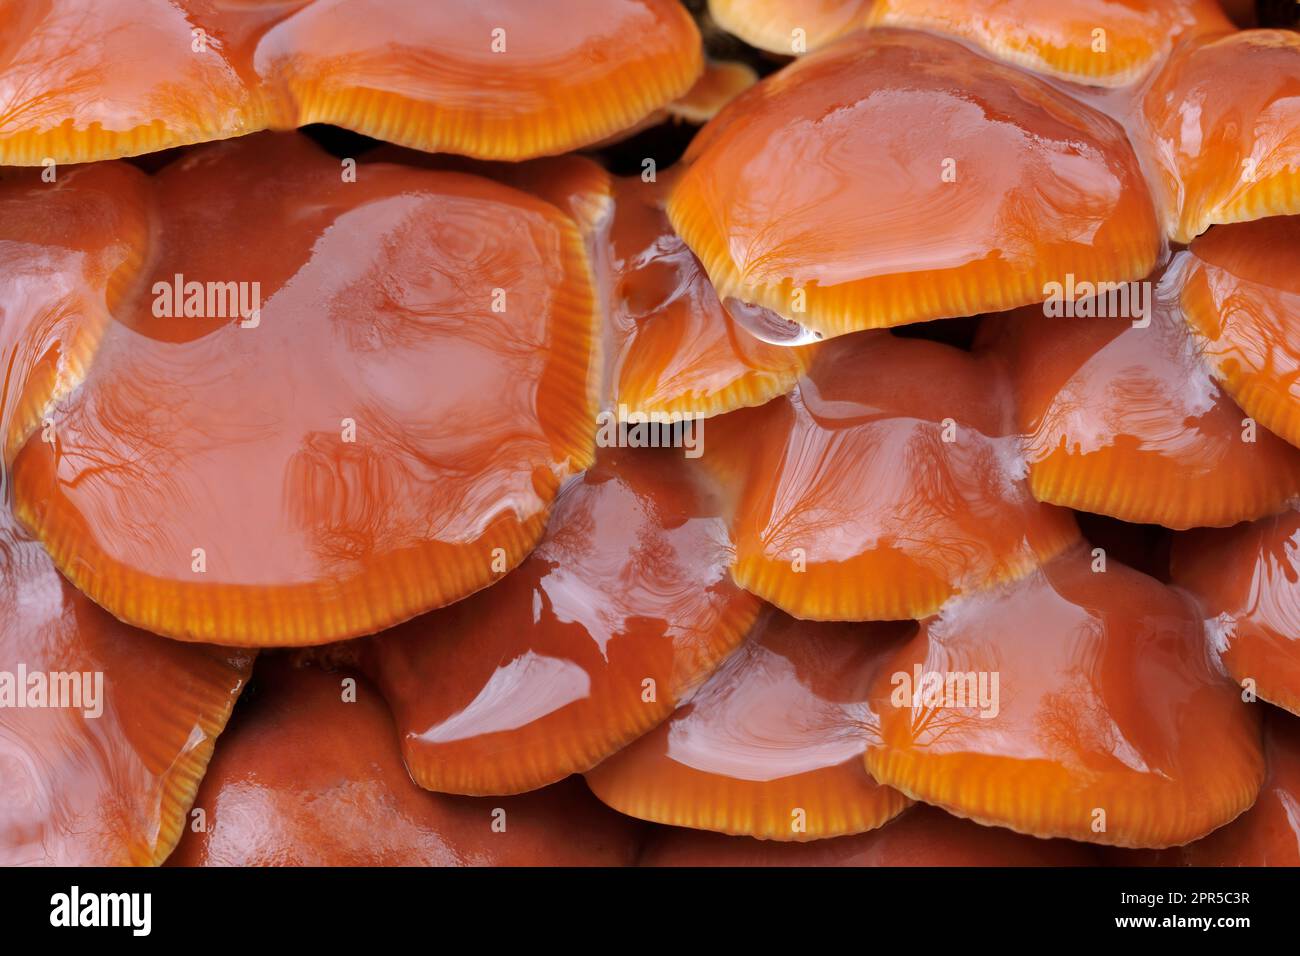 Velvet Shank Fungi / Winter Mushroom (Flammulina velutipes) close-up of cluster growing on felled logs in timber stack, photographed in heavy rain. Stock Photo